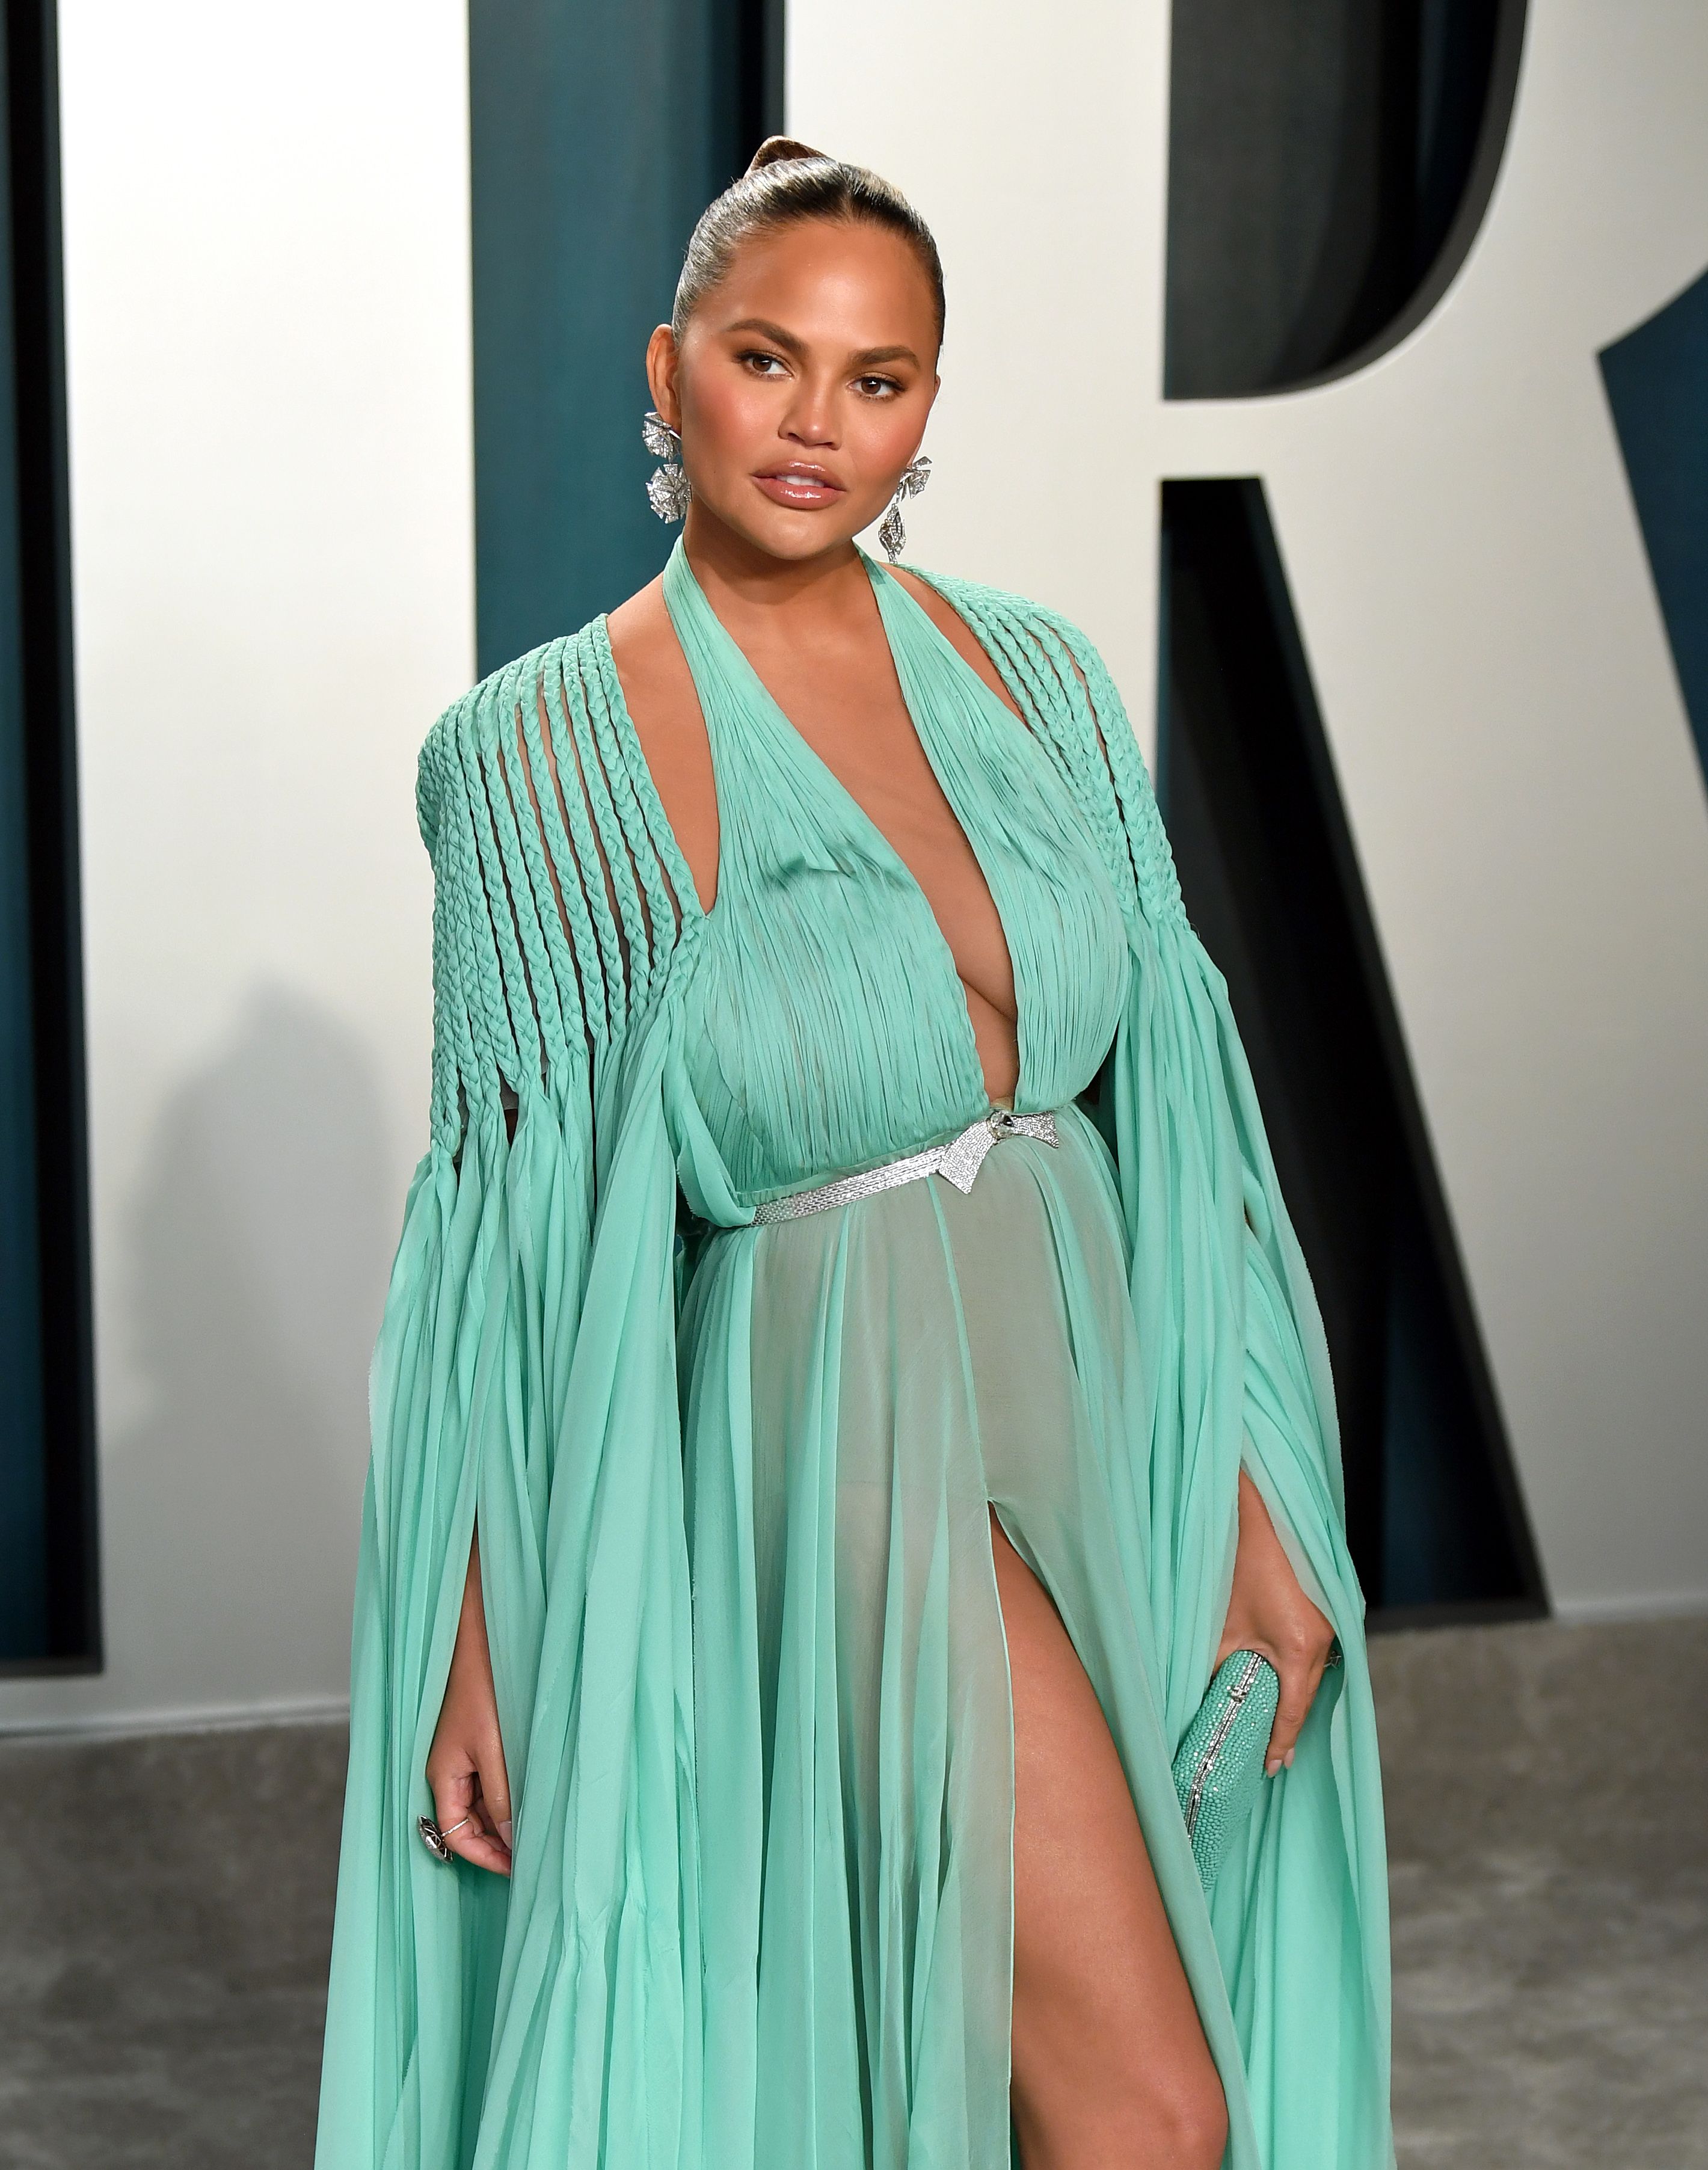 Chrissy Teigen at the 2020 Vanity Fair Oscar Party in February 2020 in Beverly Hills. | Photo:Getty Images